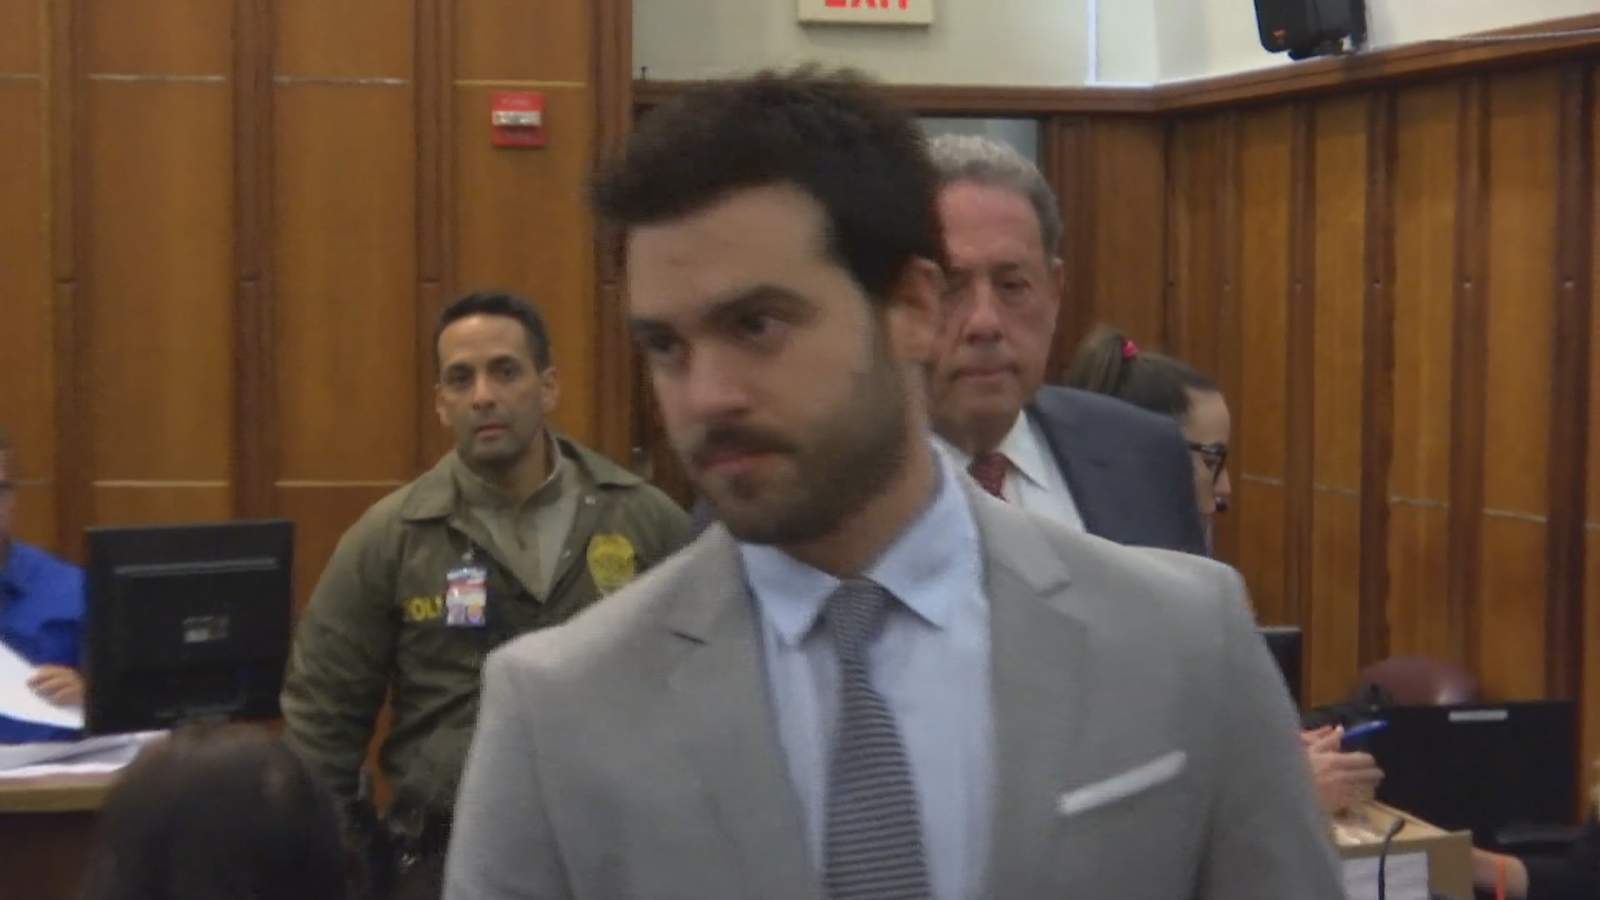 Mexican actor charged with manslaughter granted ‘roaming status’ in Miami-Dade County